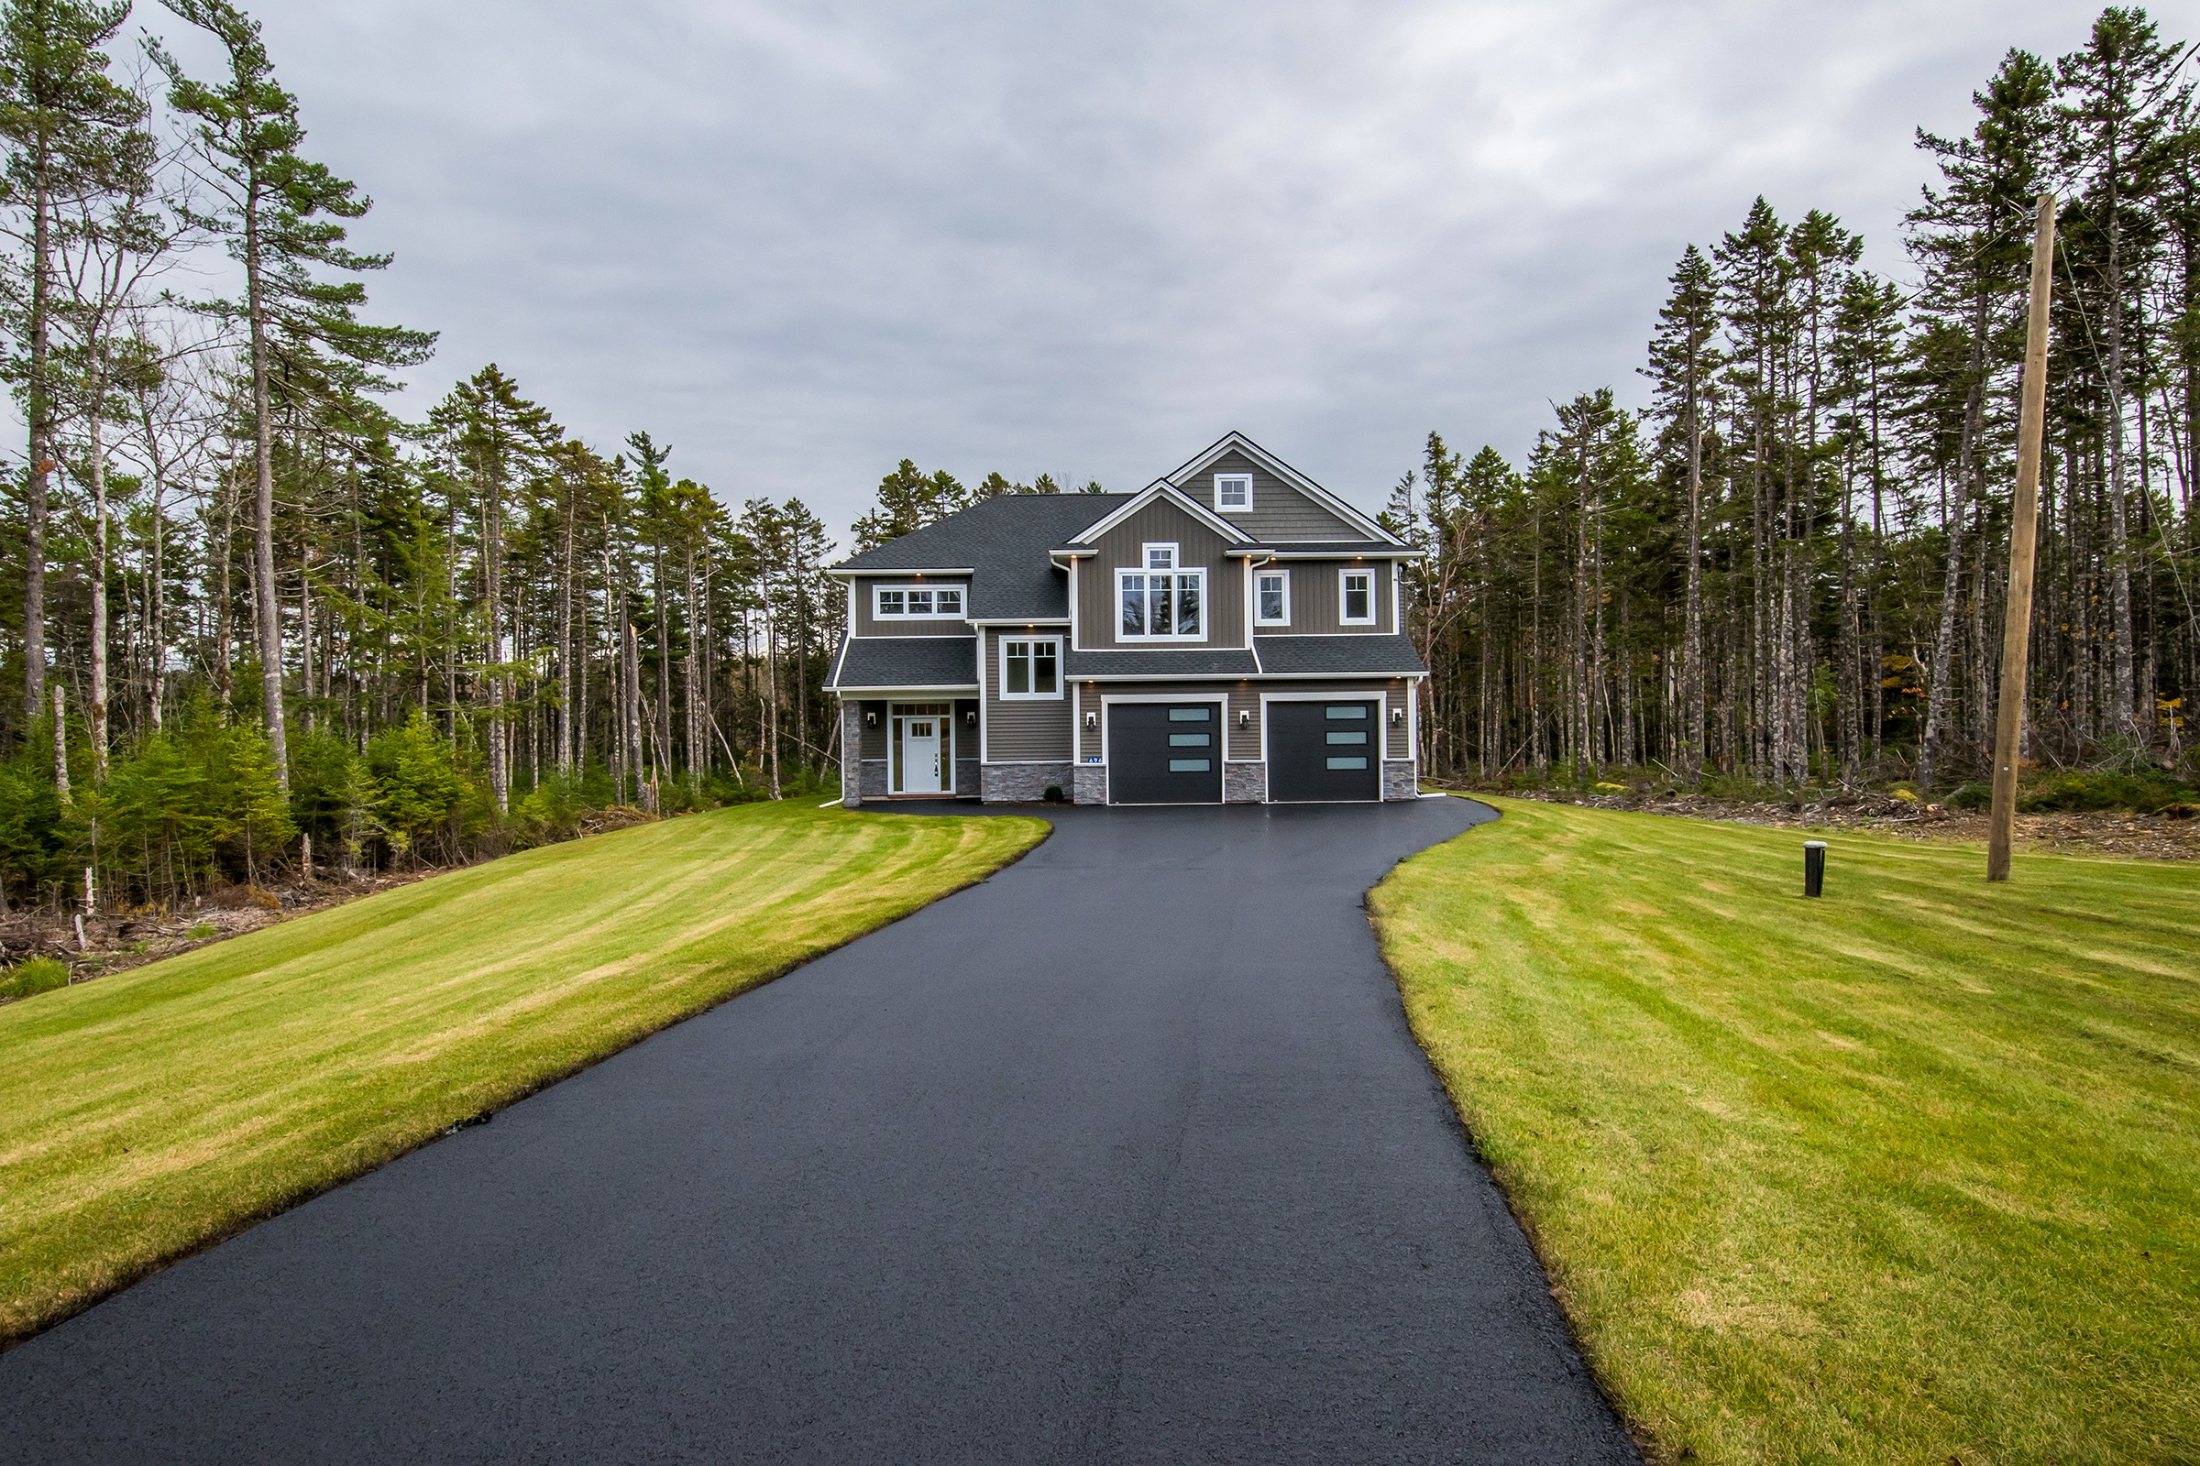 Discover Kinloch Subdivision in Fall River: A Hidden Gem